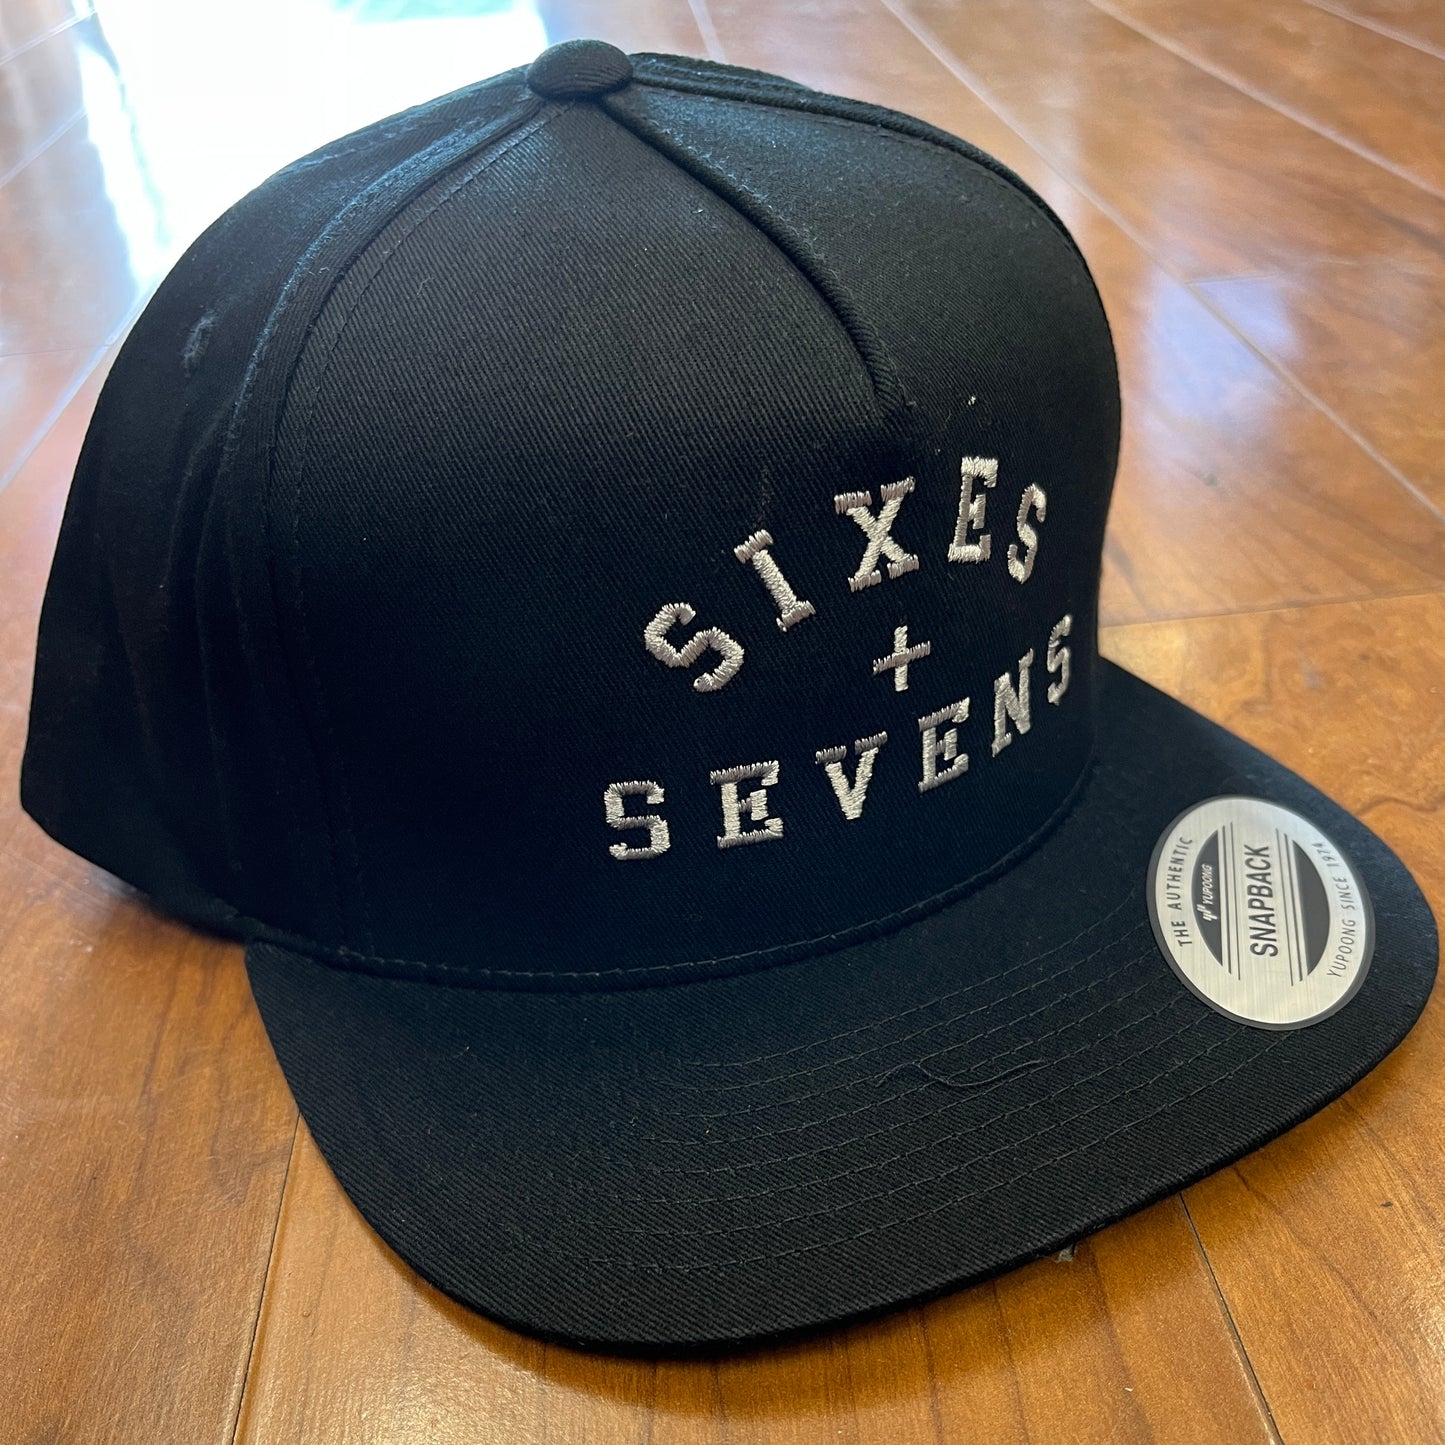 Sixes and Sevens "Stacked" Hat